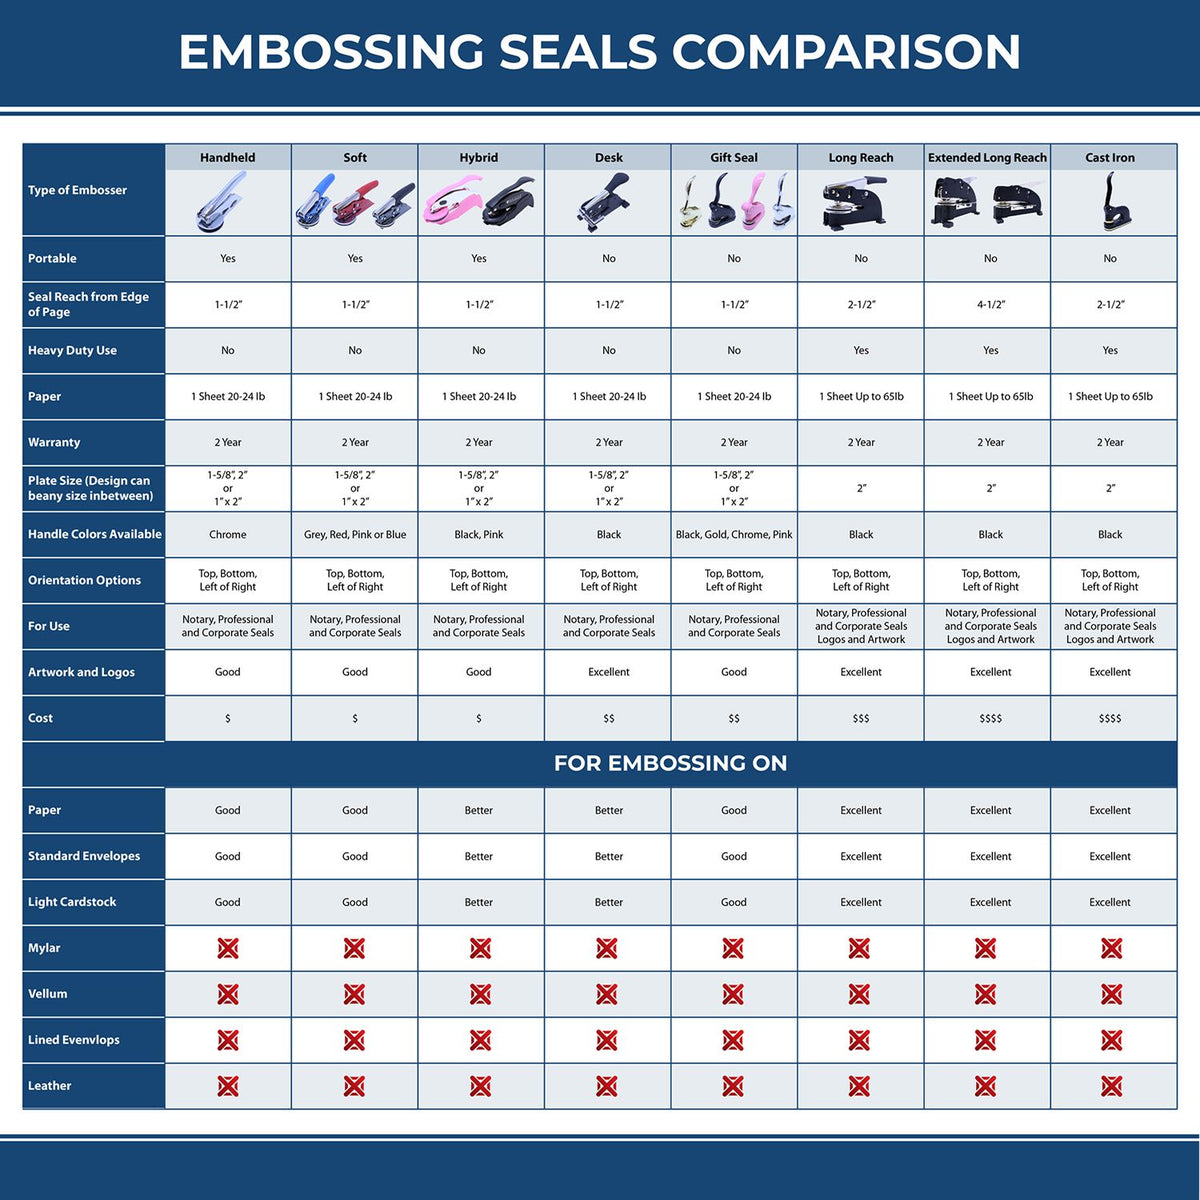 A comparison chart for the different types of mount models available for the Soft Pennsylvania Professional Geologist Seal